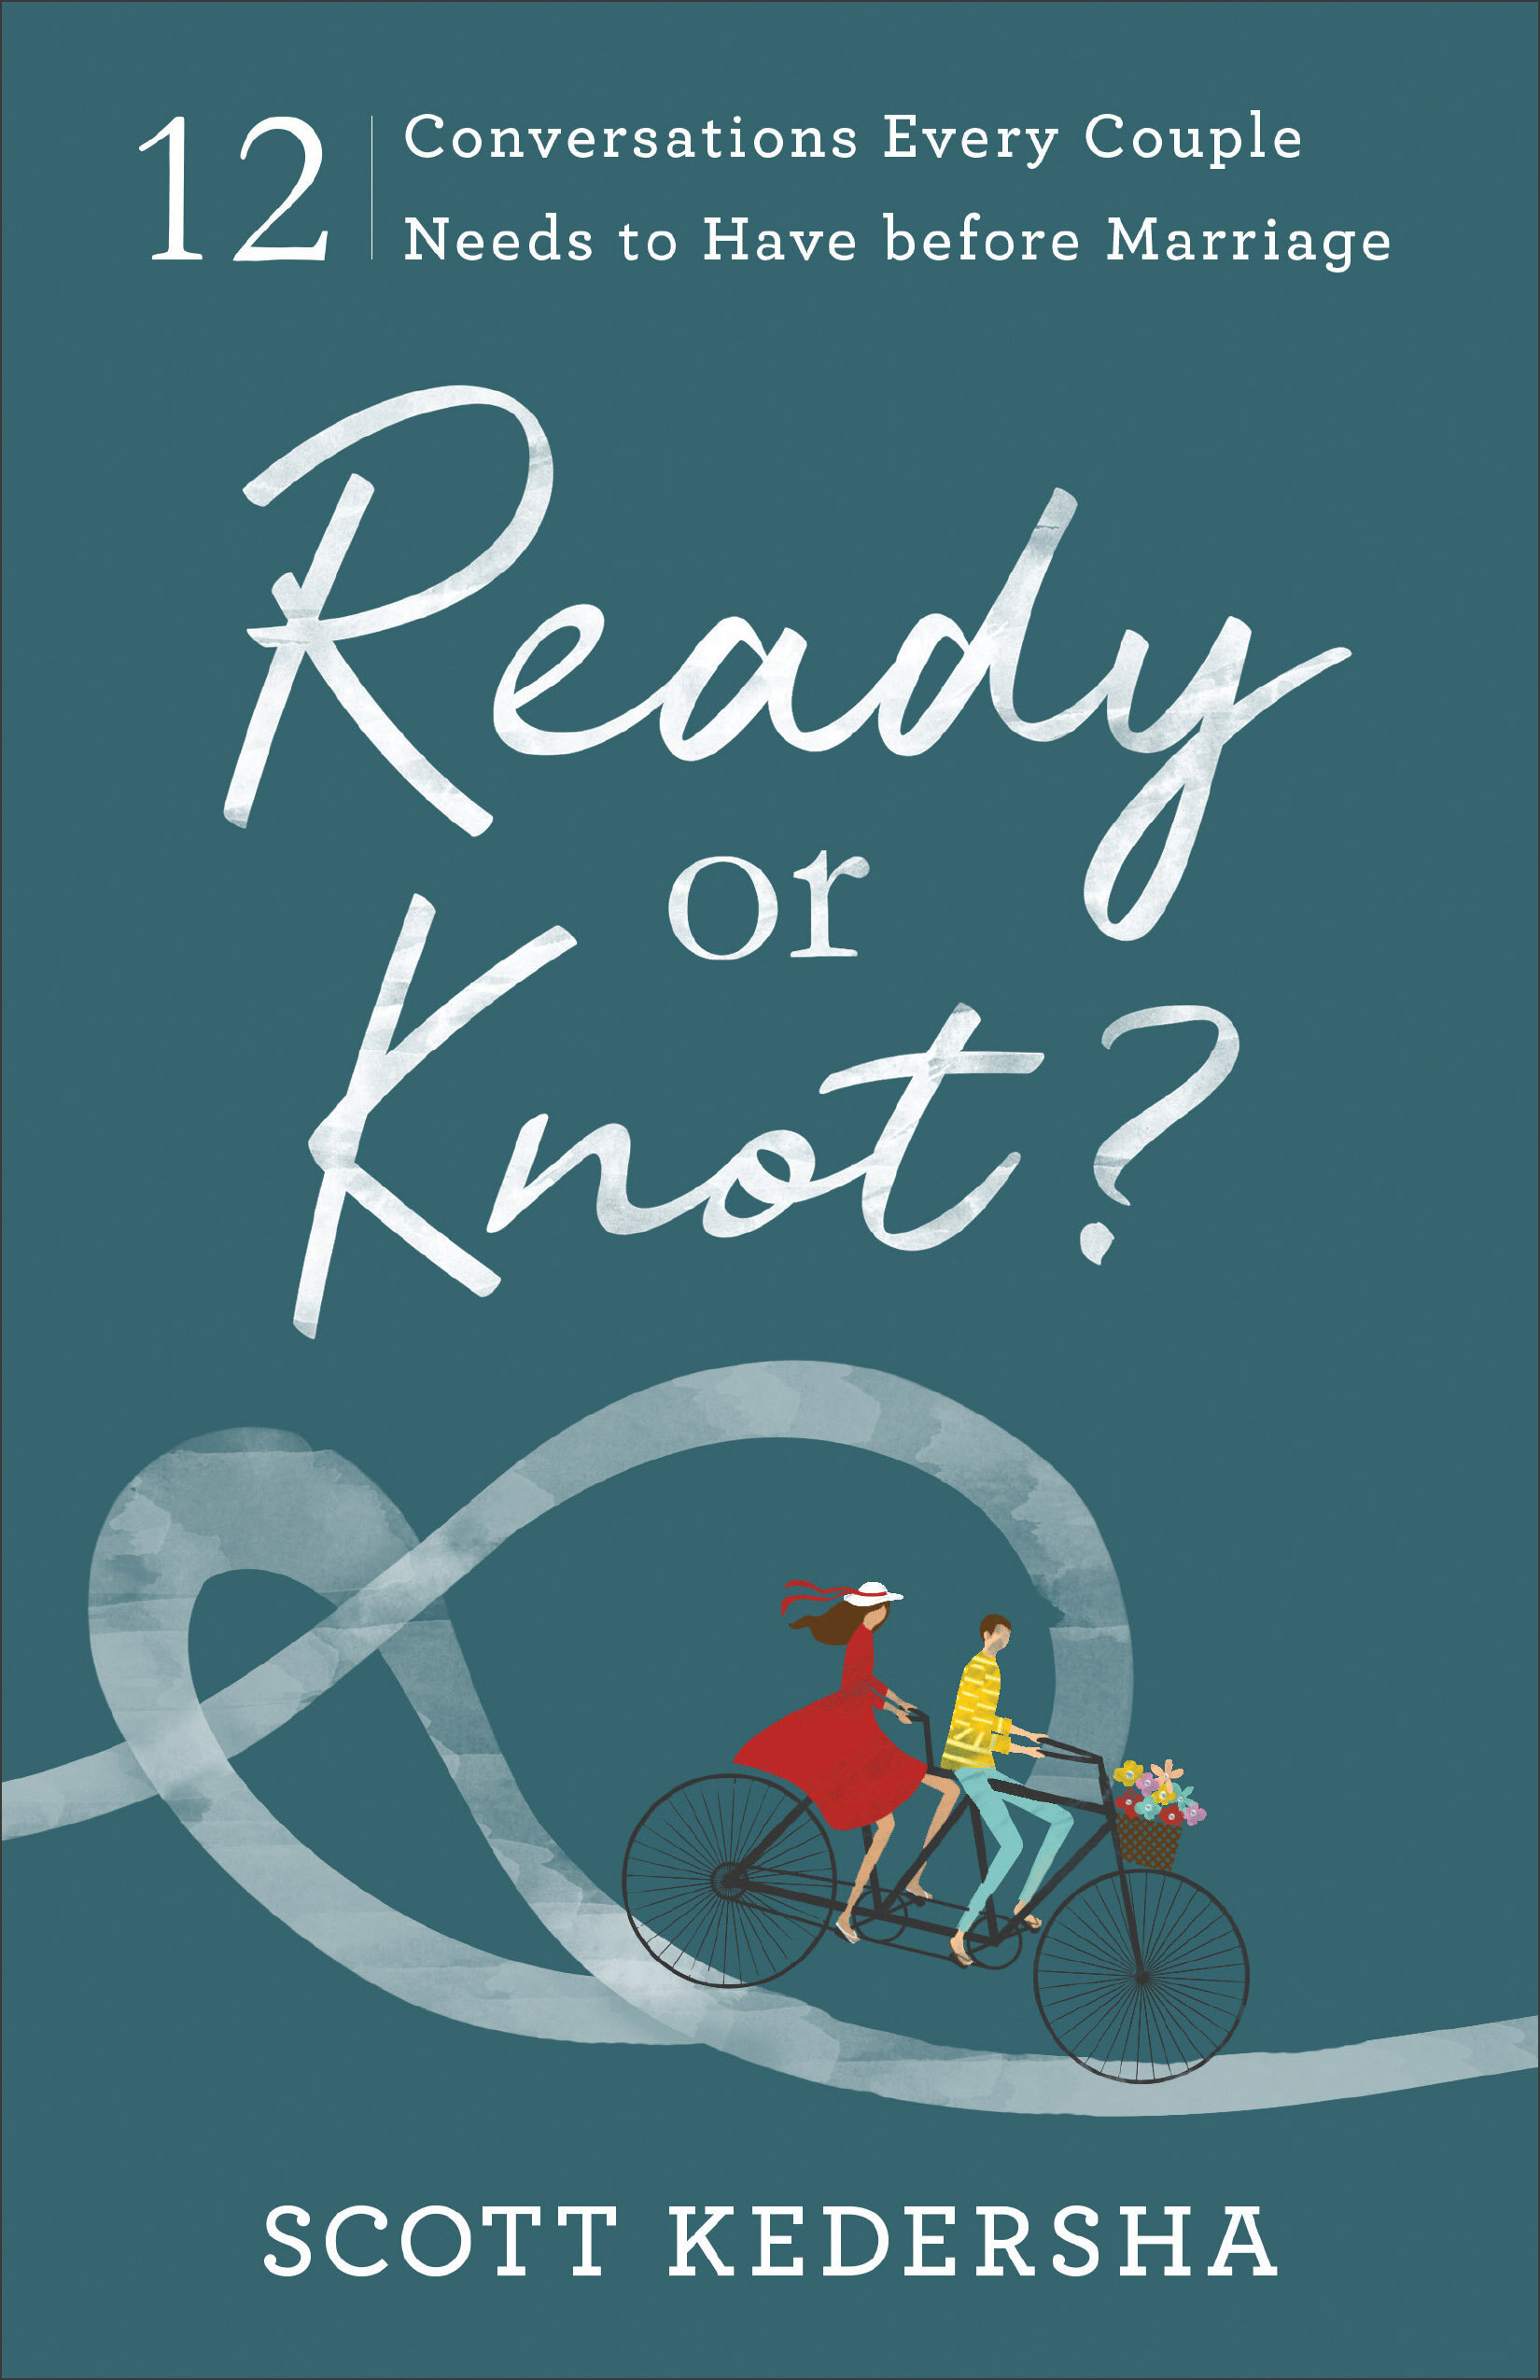 Ready or Knot? 12 Conversations Every Couple Needs to Have before Marriage